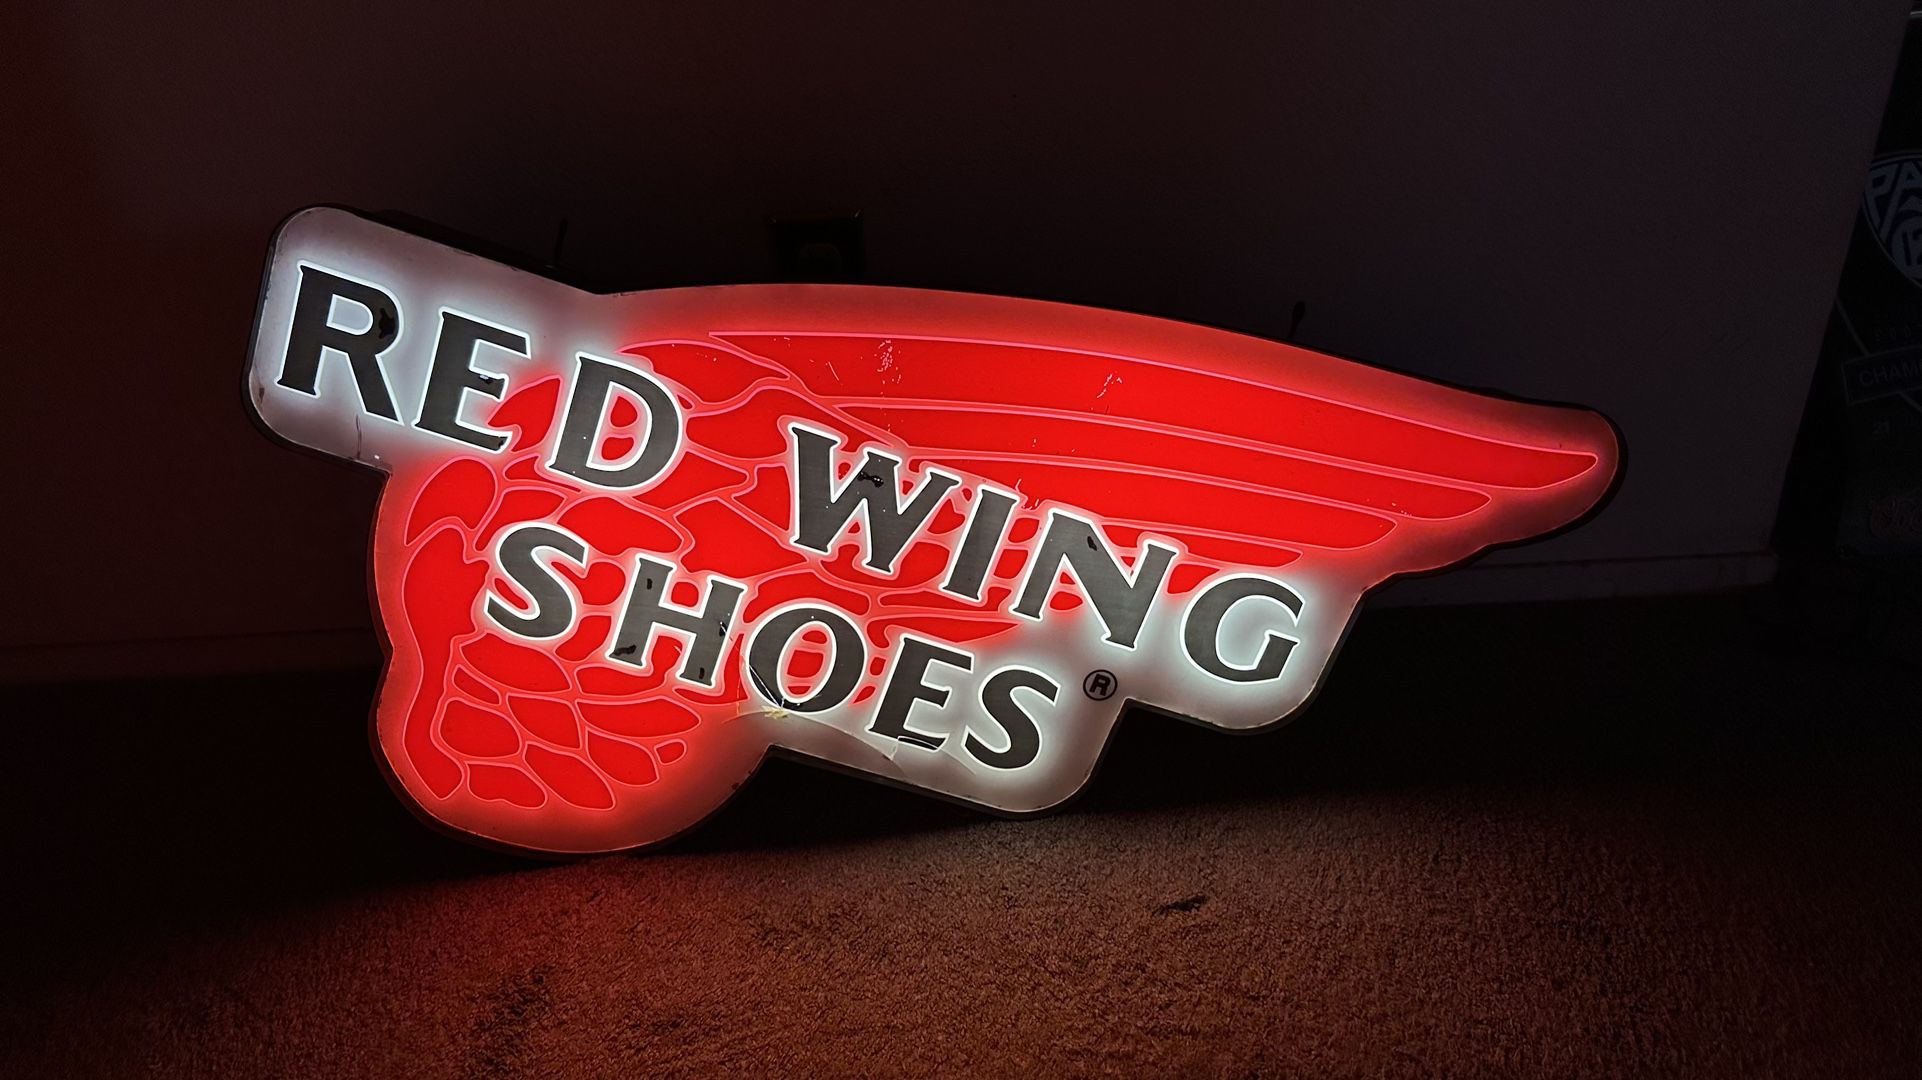  Vintage Red wing Shoes Boots Lighted Sign Advertisement